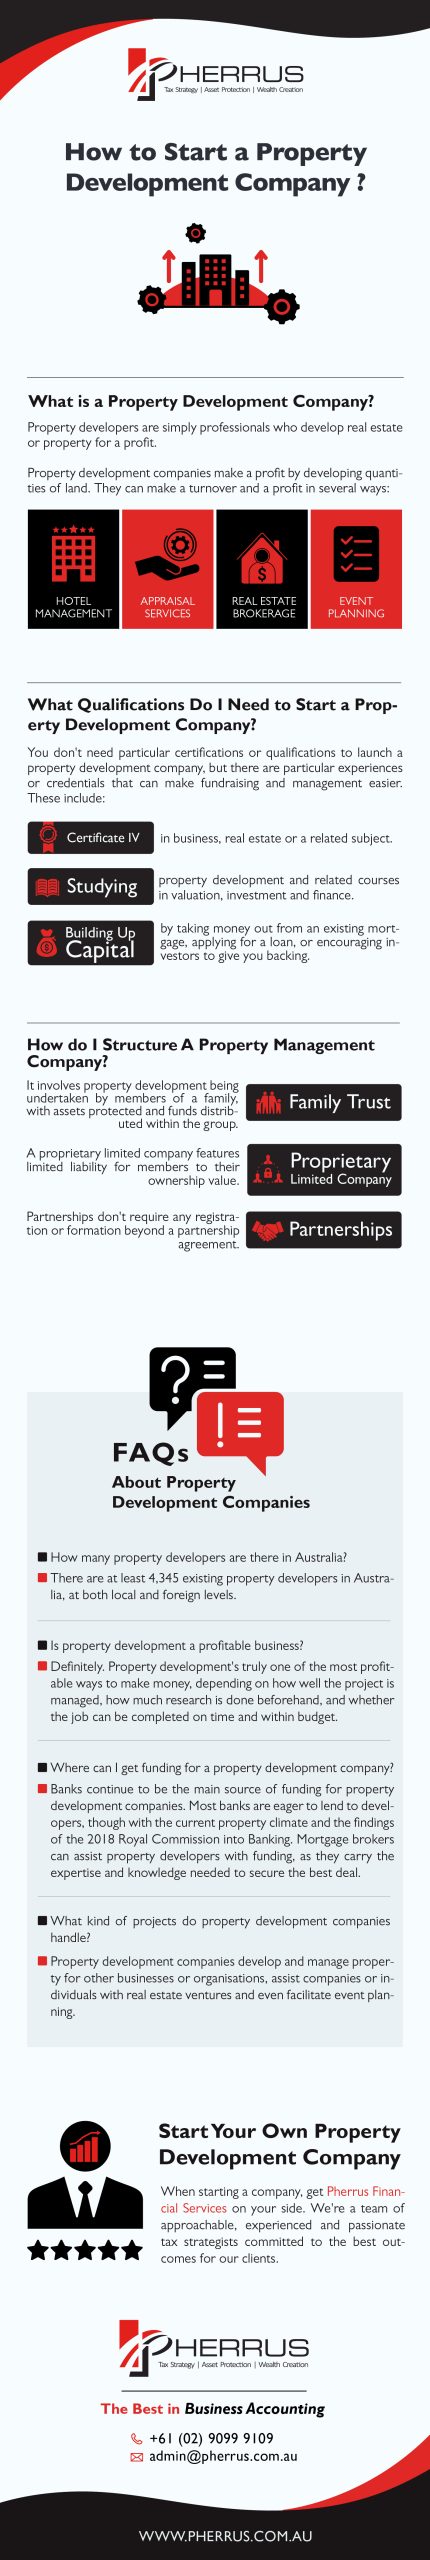 How to Start a Property Development Company Infographic